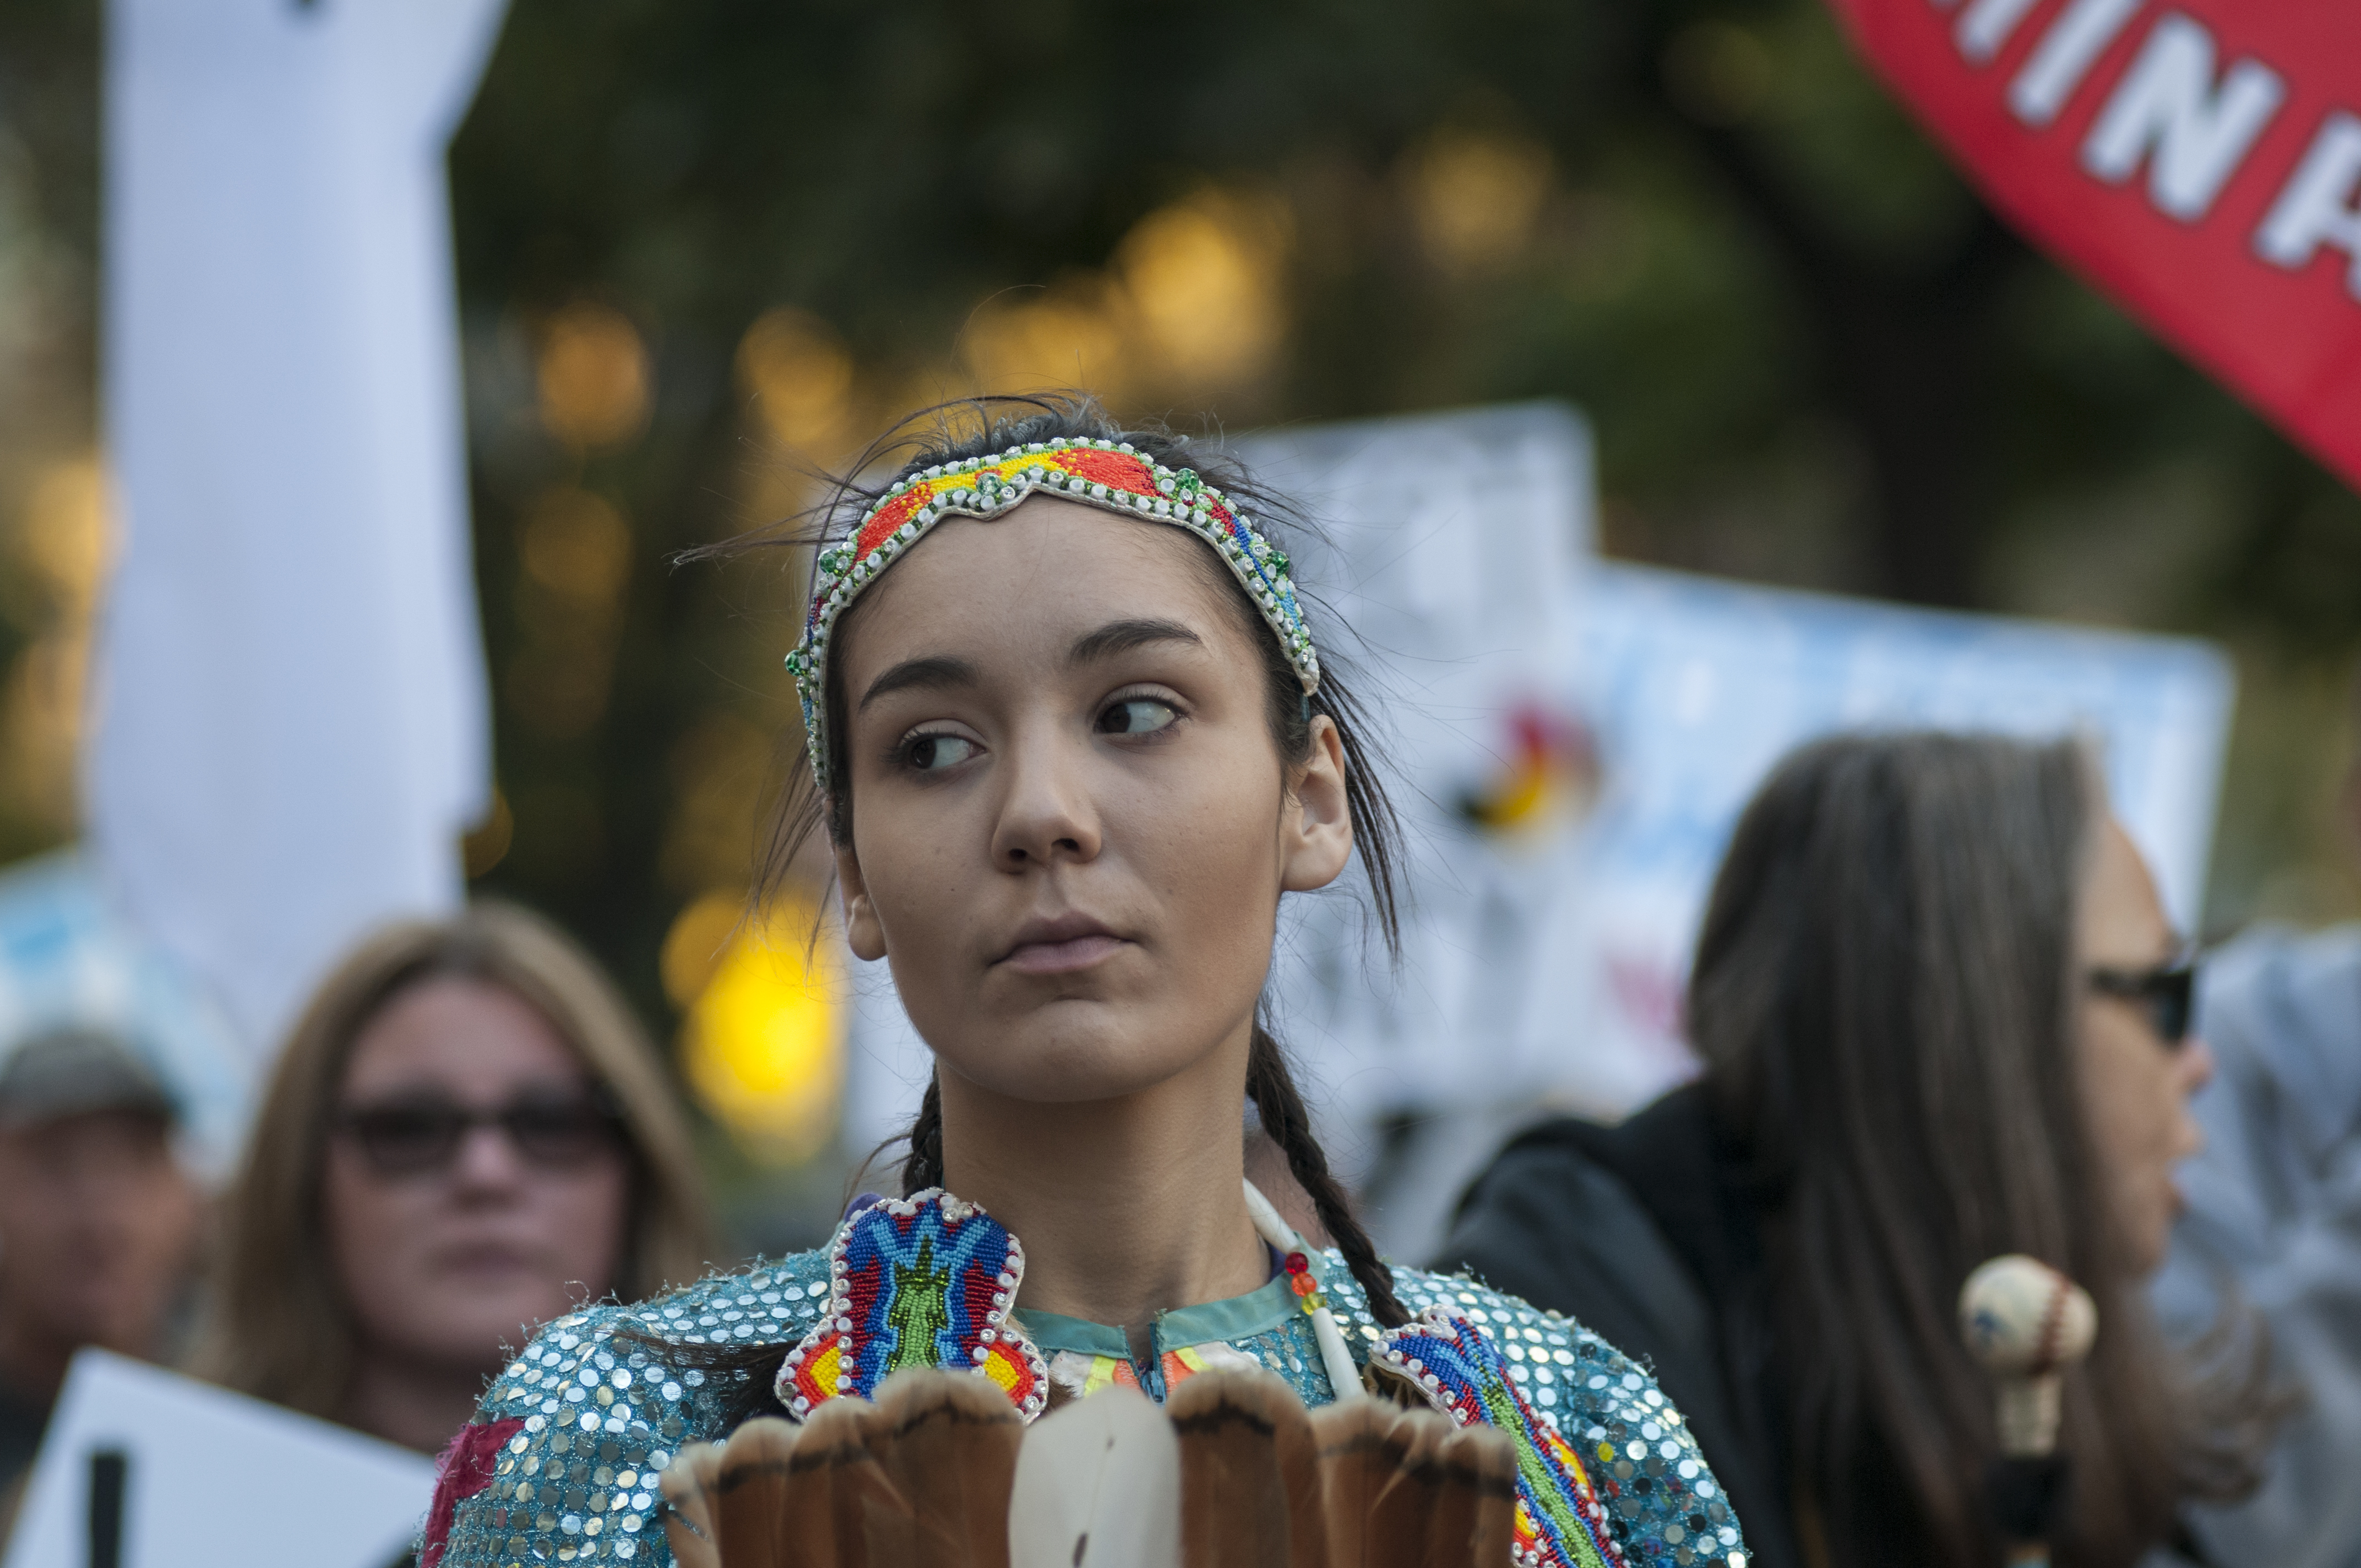 An indigenous woman dressed in traditional outfit during a solidarity rally with the Dakota Access Pipeline protesters on November 5, 2016 in Toronto, Canada.